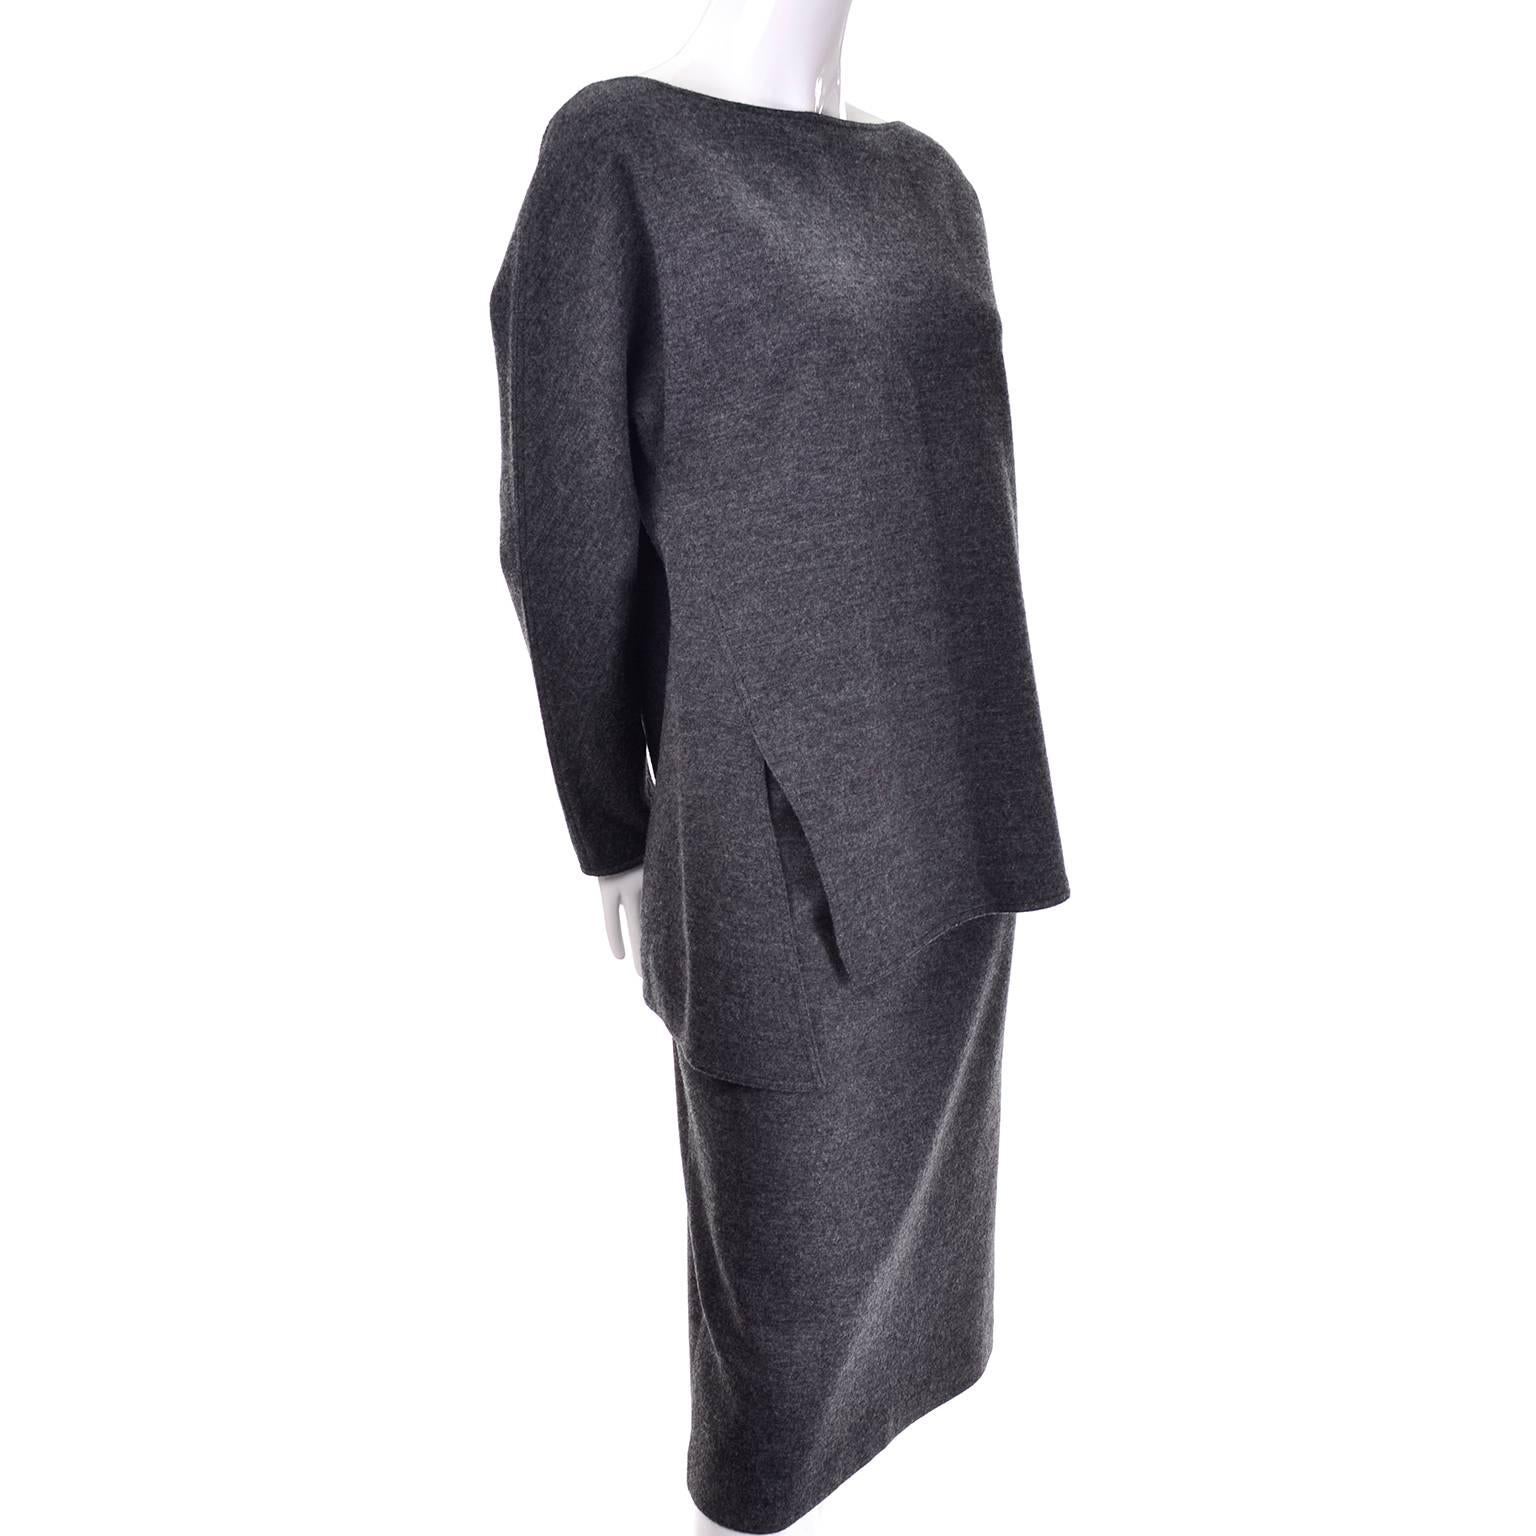 This 2 piece vintage Geoffrey Beene minimalist outfit includes a top and a skirt made of a lightweight gray wool. The skirt has a back zipper and is labeled a size 10 and is lined. The fabric has a bit of stretch to it and the outfit can be belted